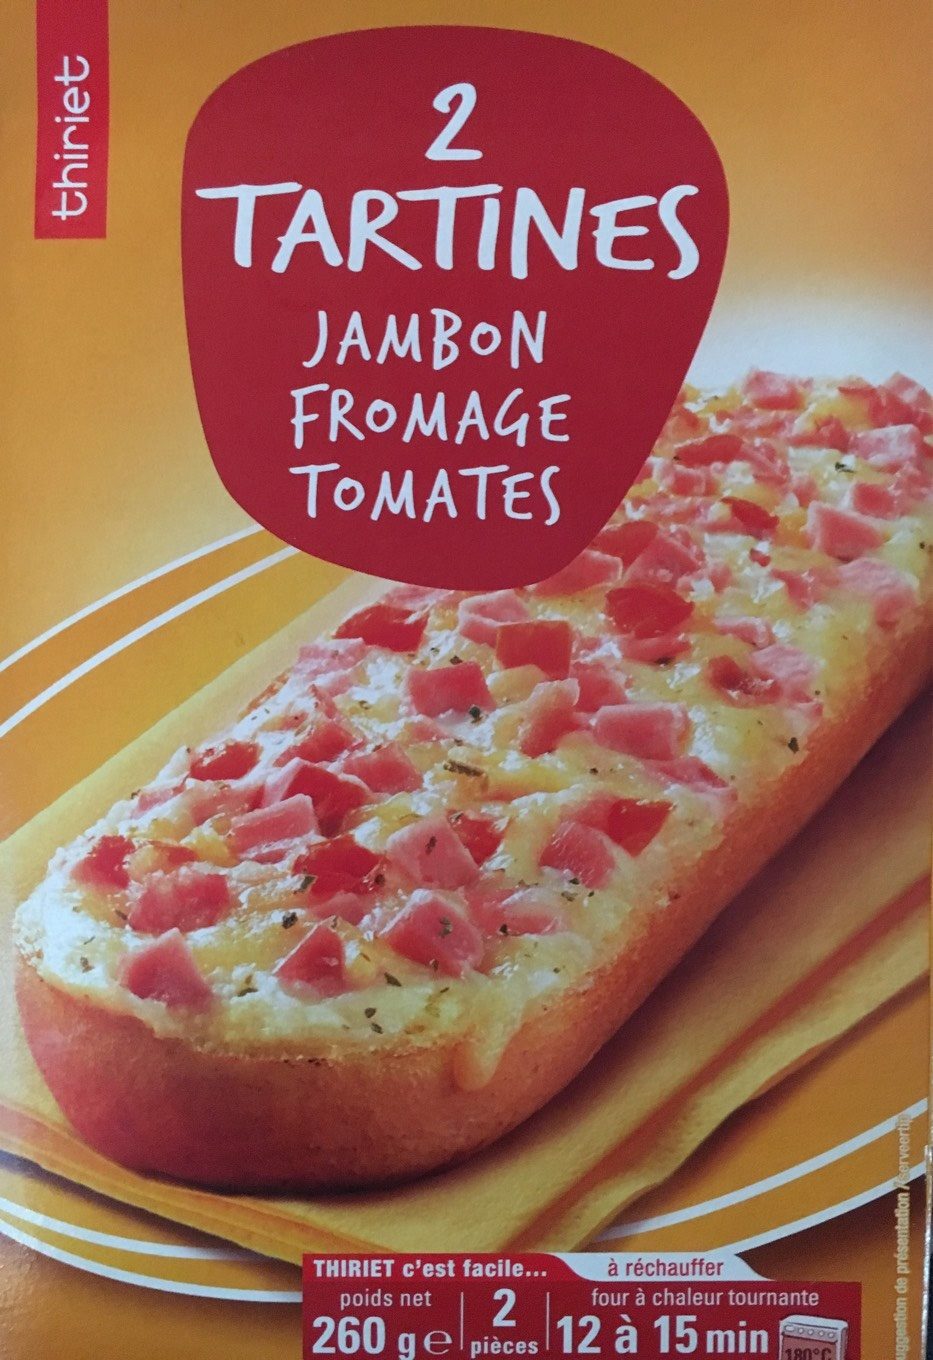 2 Tartines Jambon Fromage Tomates - Tableau nutritionnel